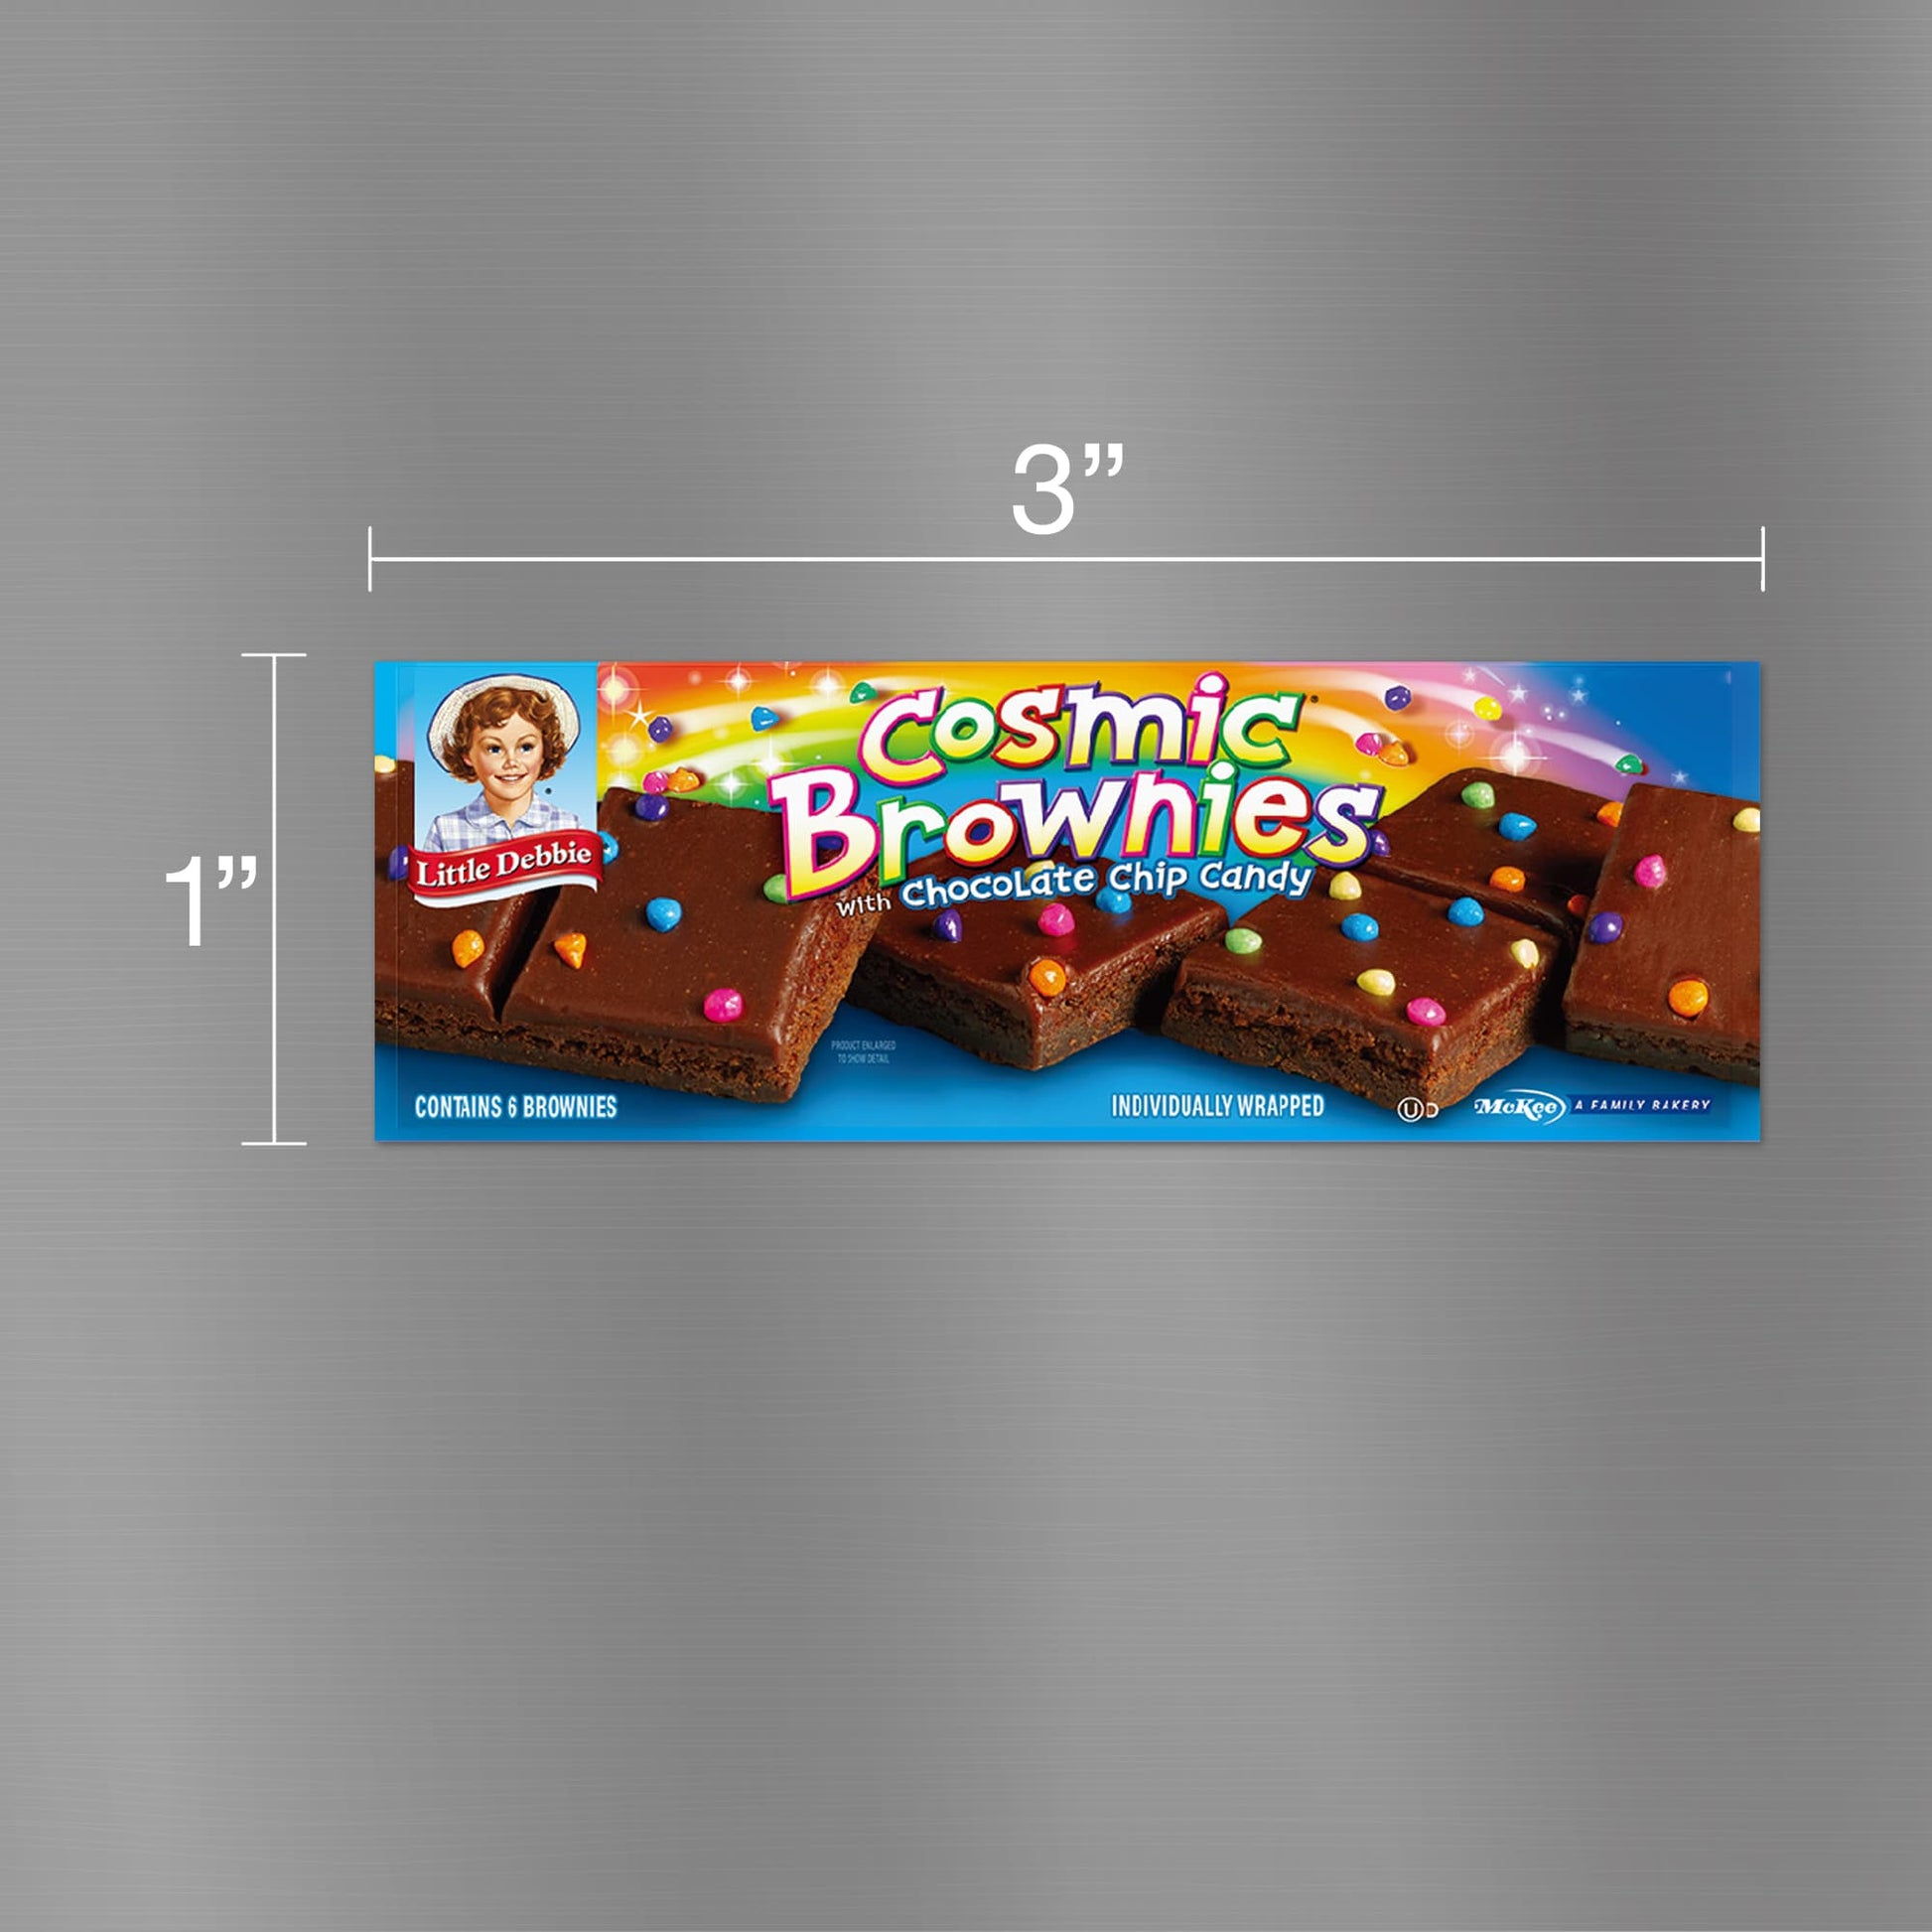 Image of a Little Debbie Cosmic® Brownies carton magnet, measuring 3 inches wide and 1 inch tall. The magnet features a colorful design with the Little Debbie logo, images of square brownies topped with rainbow-colored chocolate chip candies, and the vibrant 'Cosmic® Brownies with Chocolate Chip Candy' text. The background of the carton is adorned with bright, multicolored lights, creating a festive, cosmic effect.